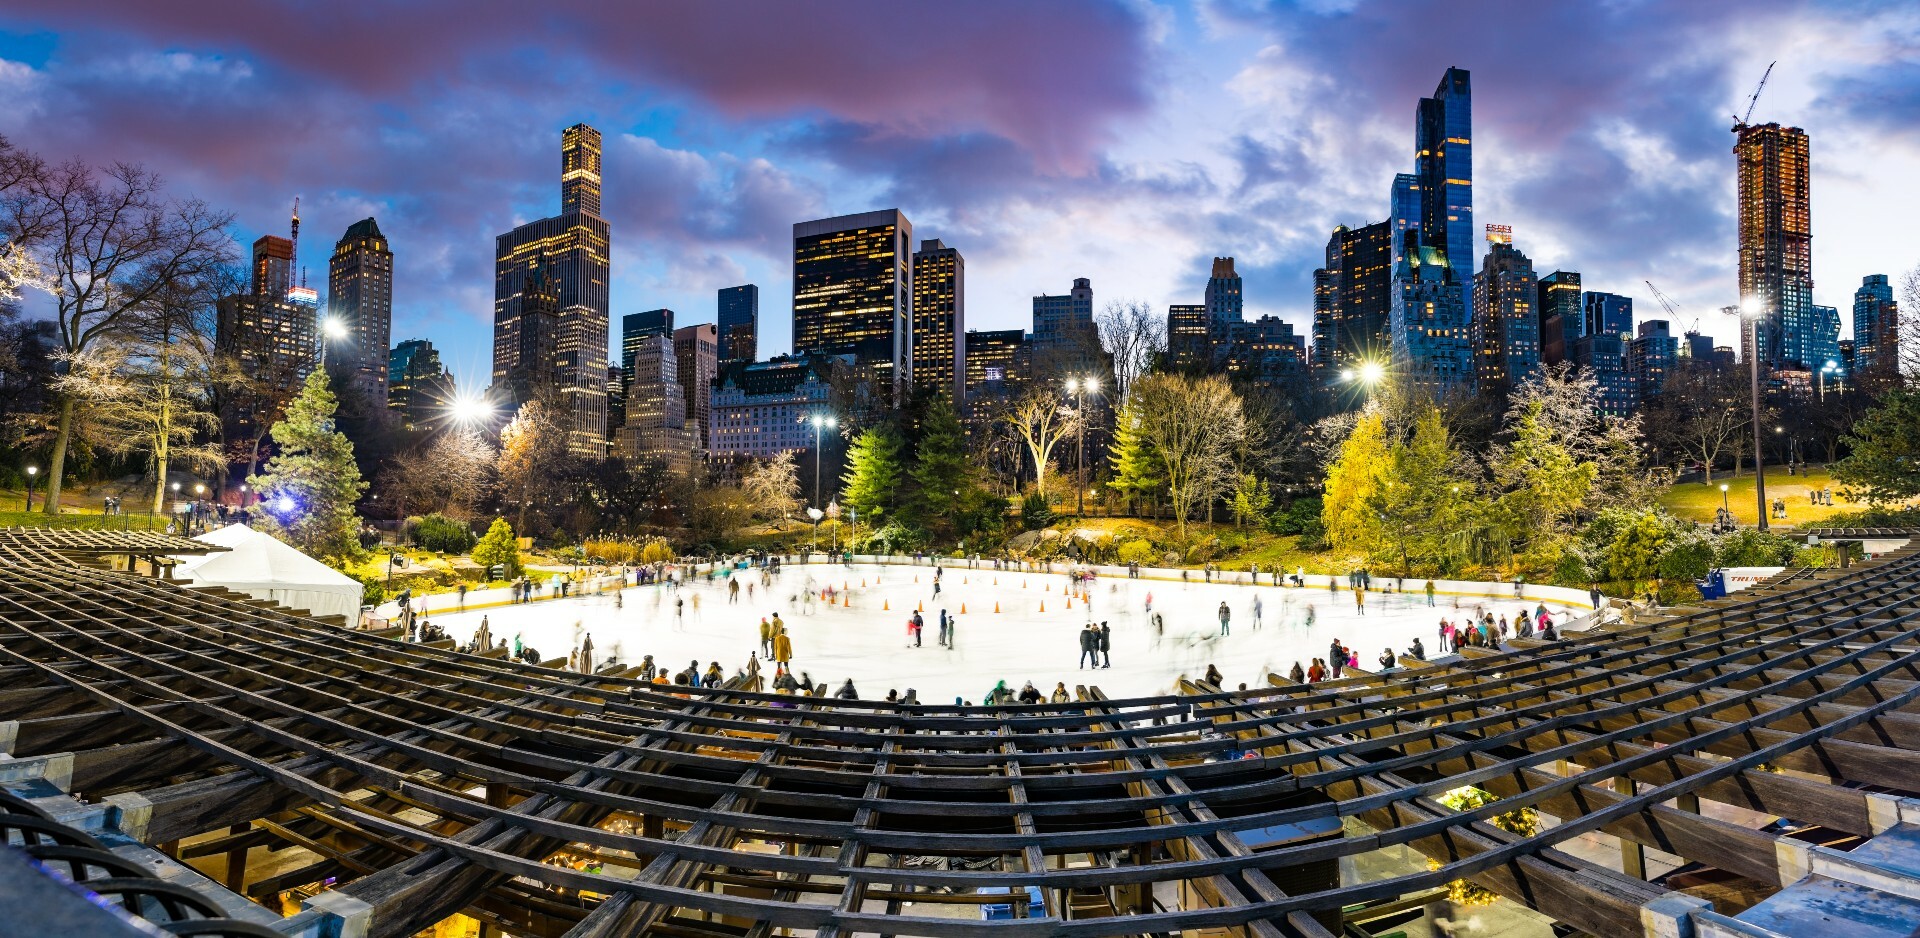 Ice Skating in Central Park NYC